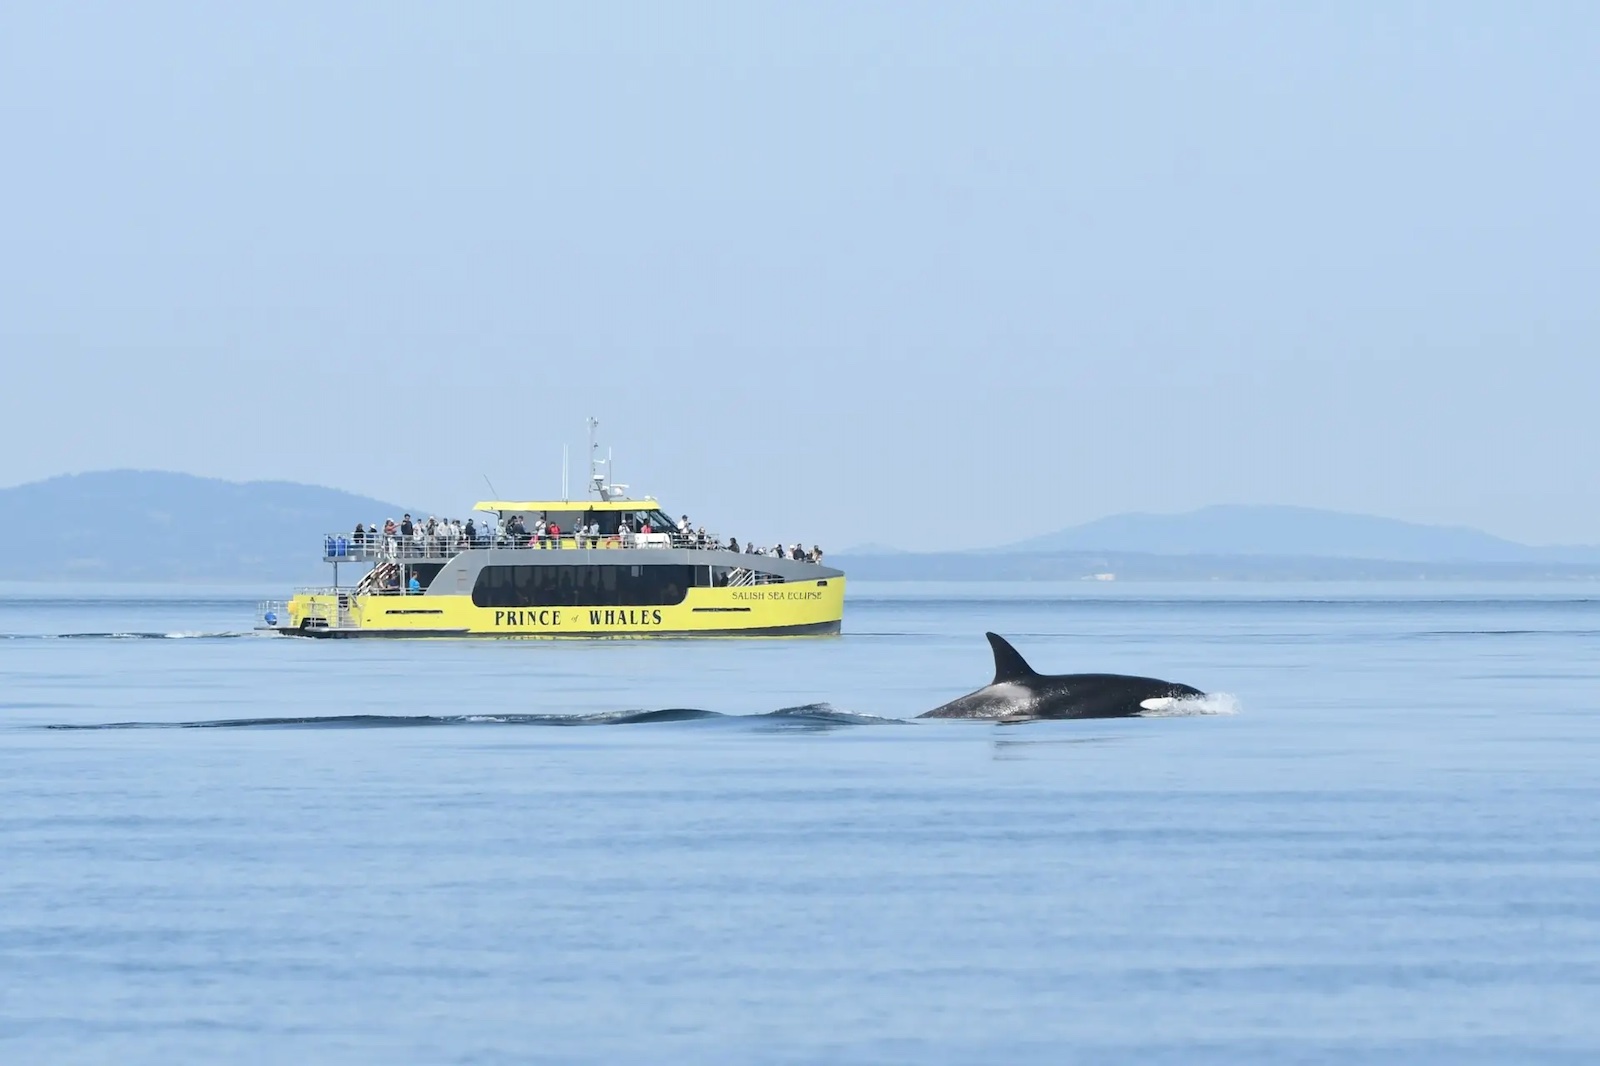 An orca swims in front of a yellow Prince of Whales boat.